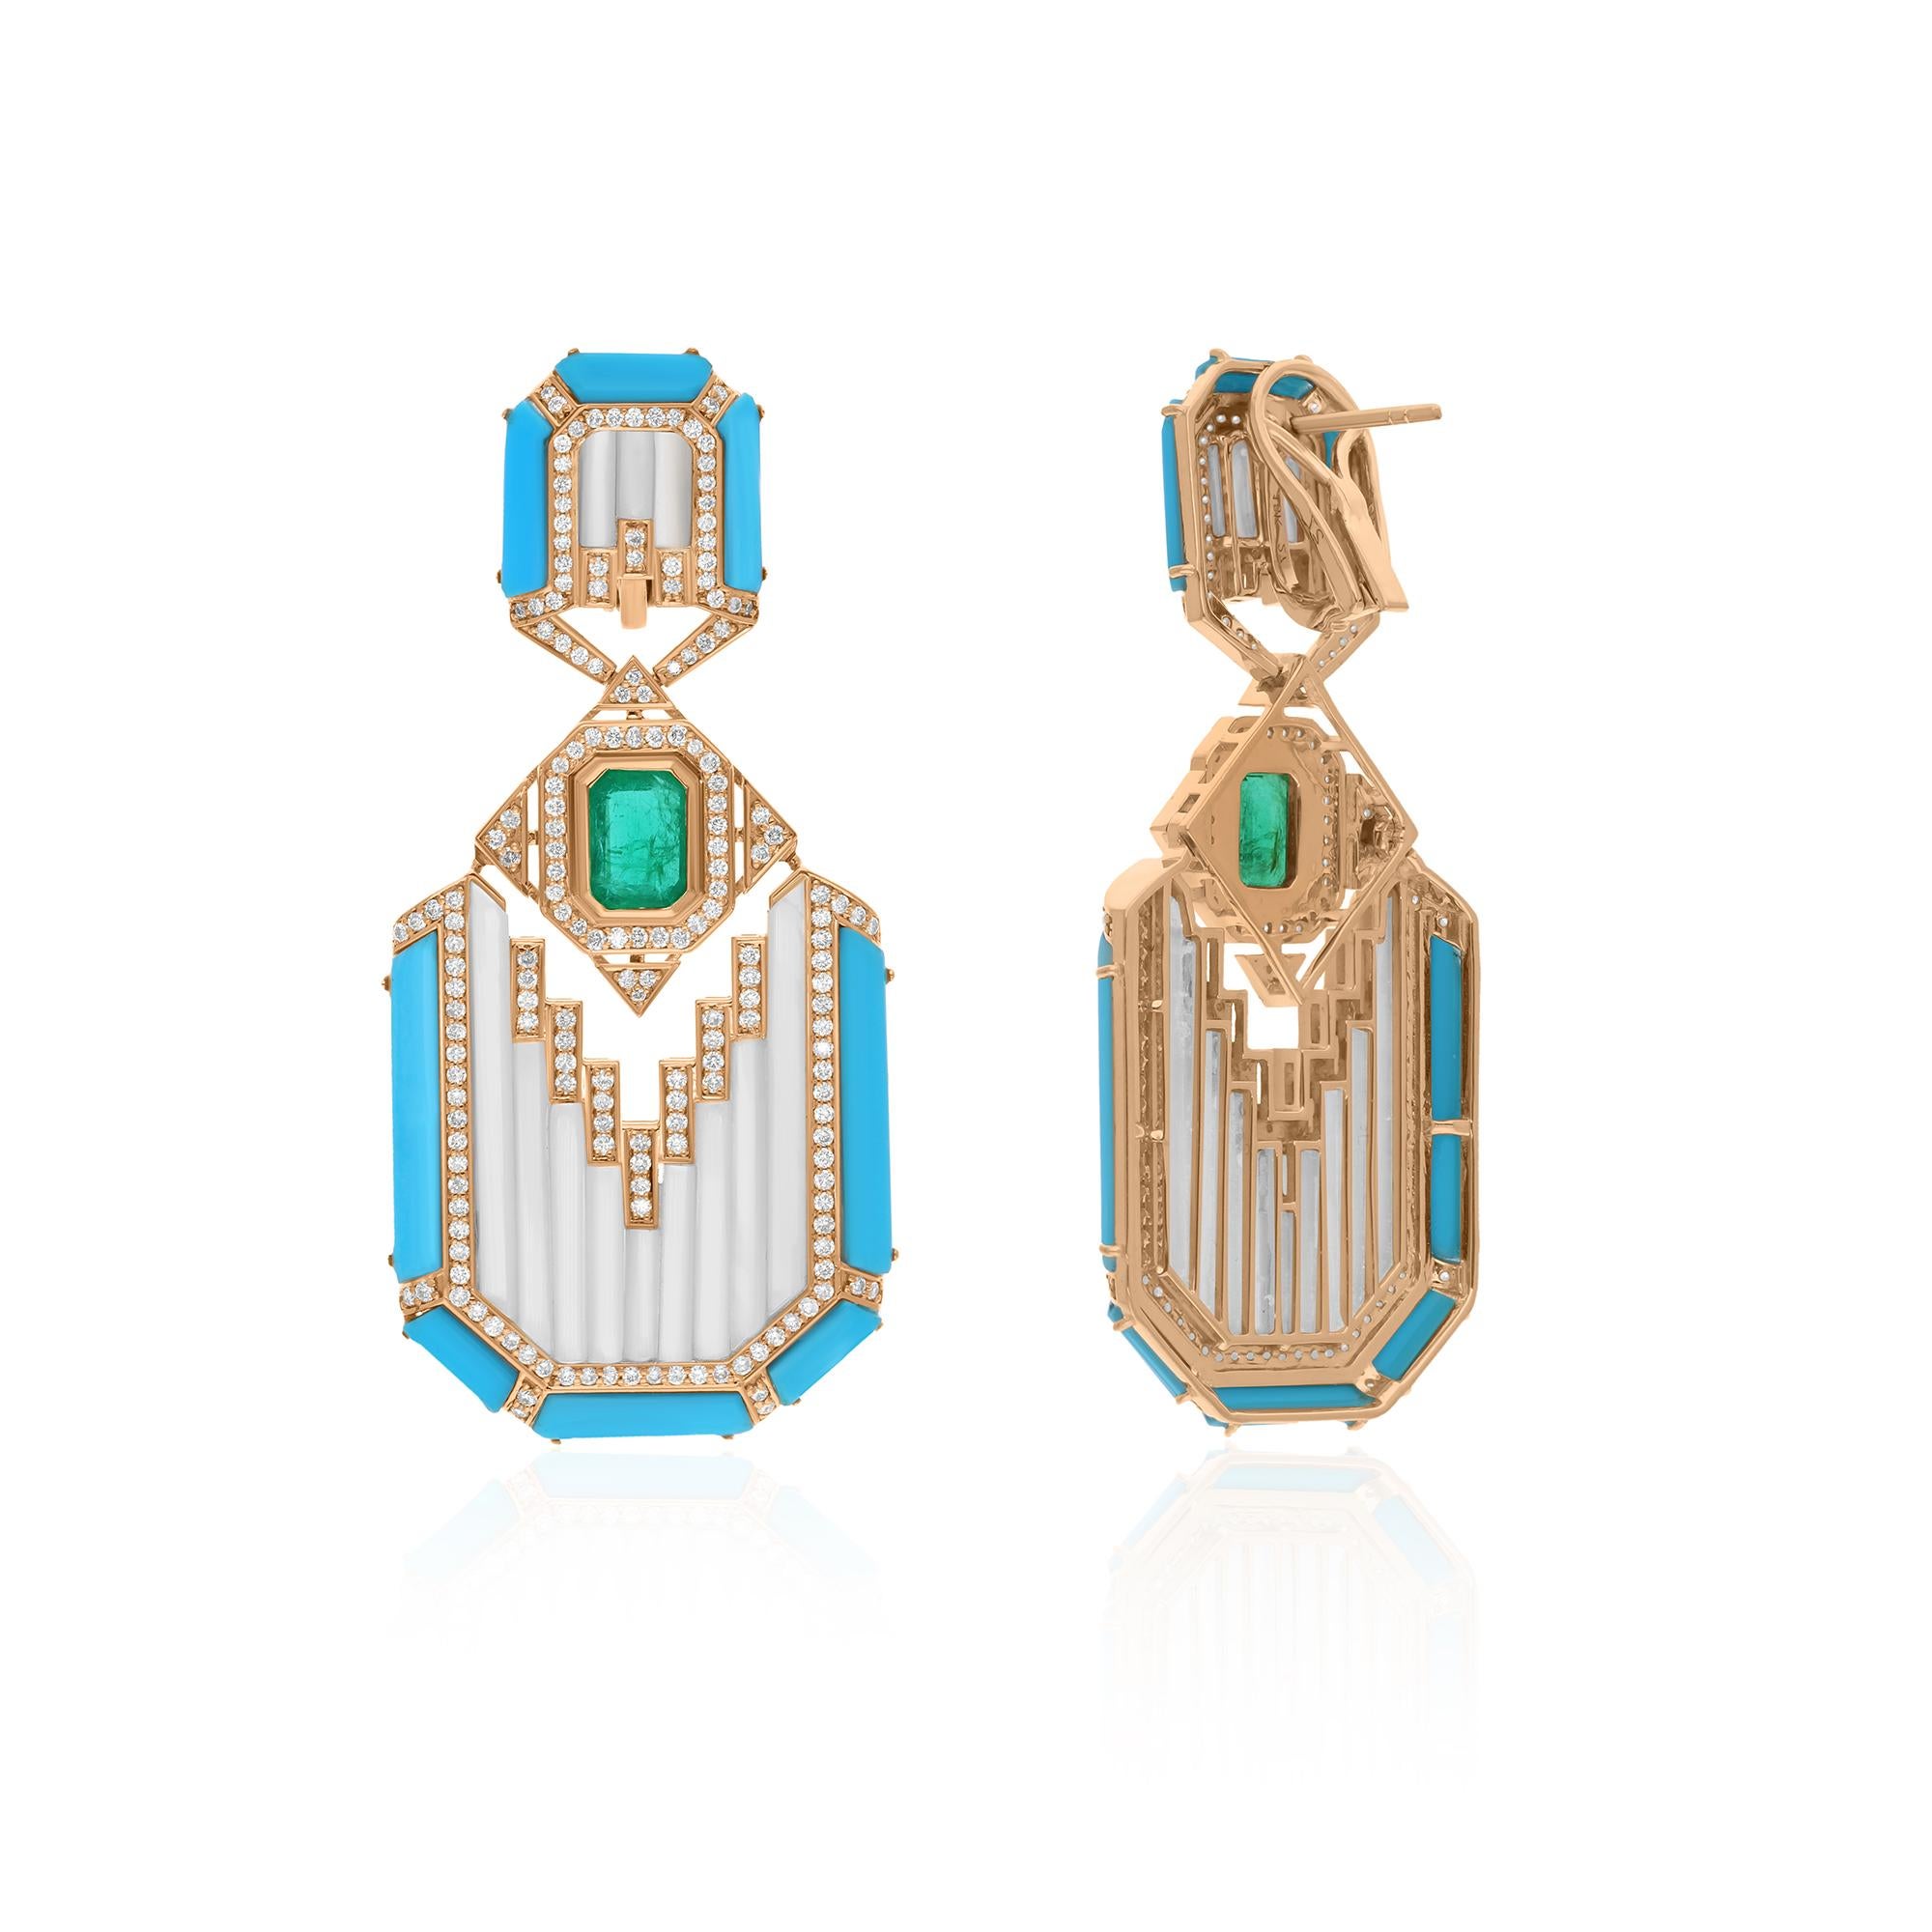 At the heart of each earring lies a luminous Mother of Pearl Turquoise gemstone, radiating with ethereal beauty. The soft iridescence of the Mother of Pearl, combined with the vibrant hues of the Turquoise, creates a captivating contrast that